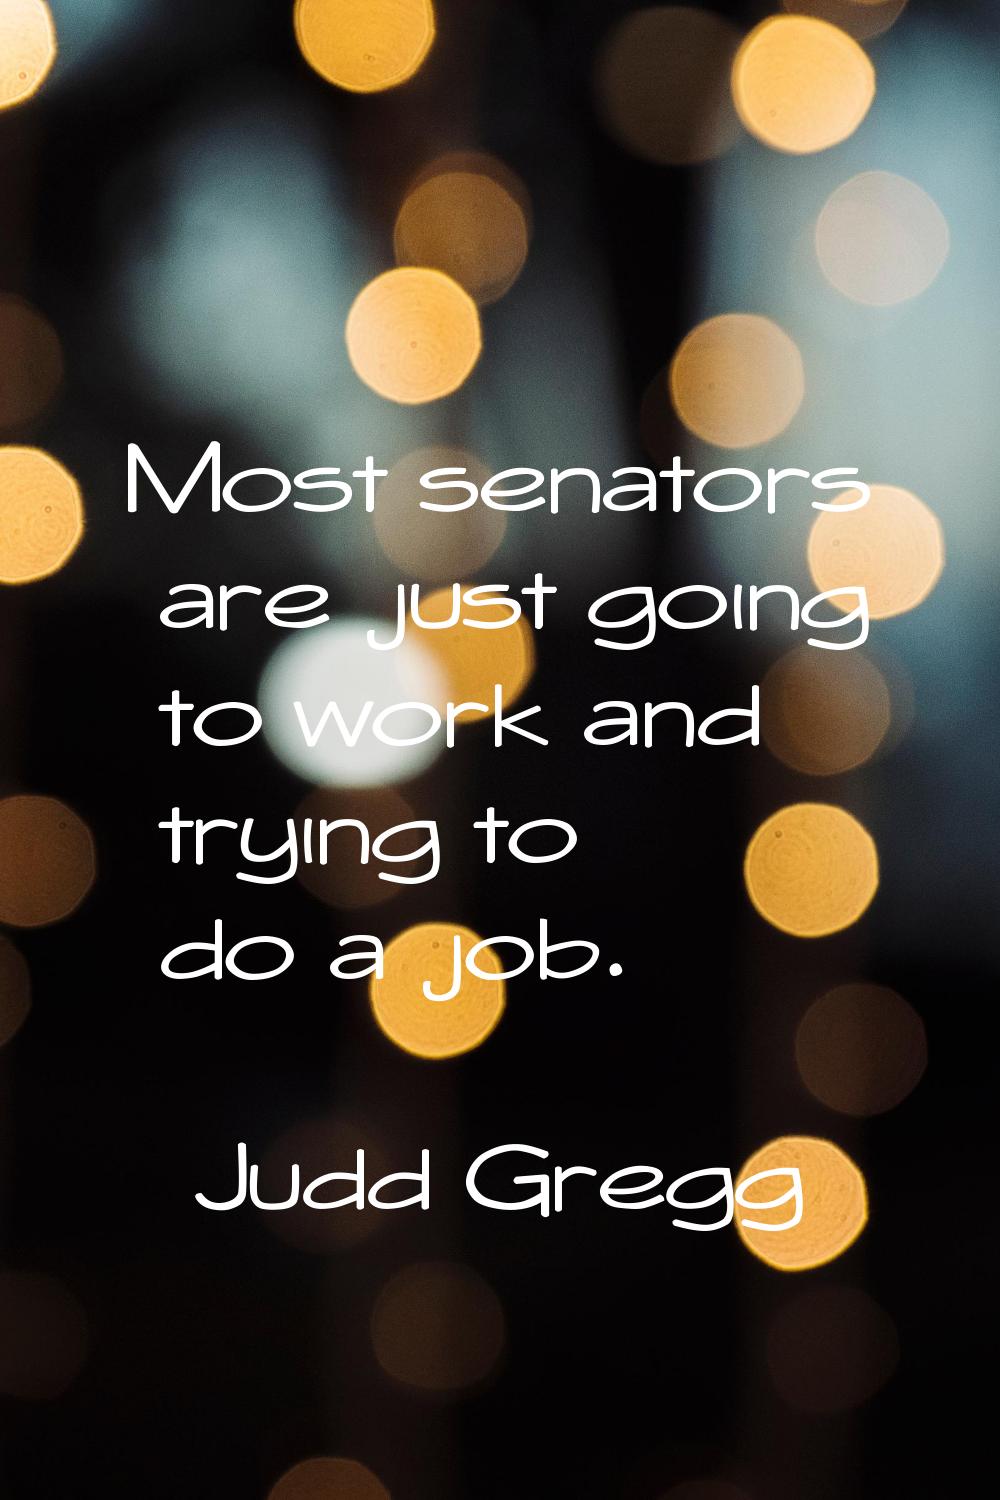 Most senators are just going to work and trying to do a job.